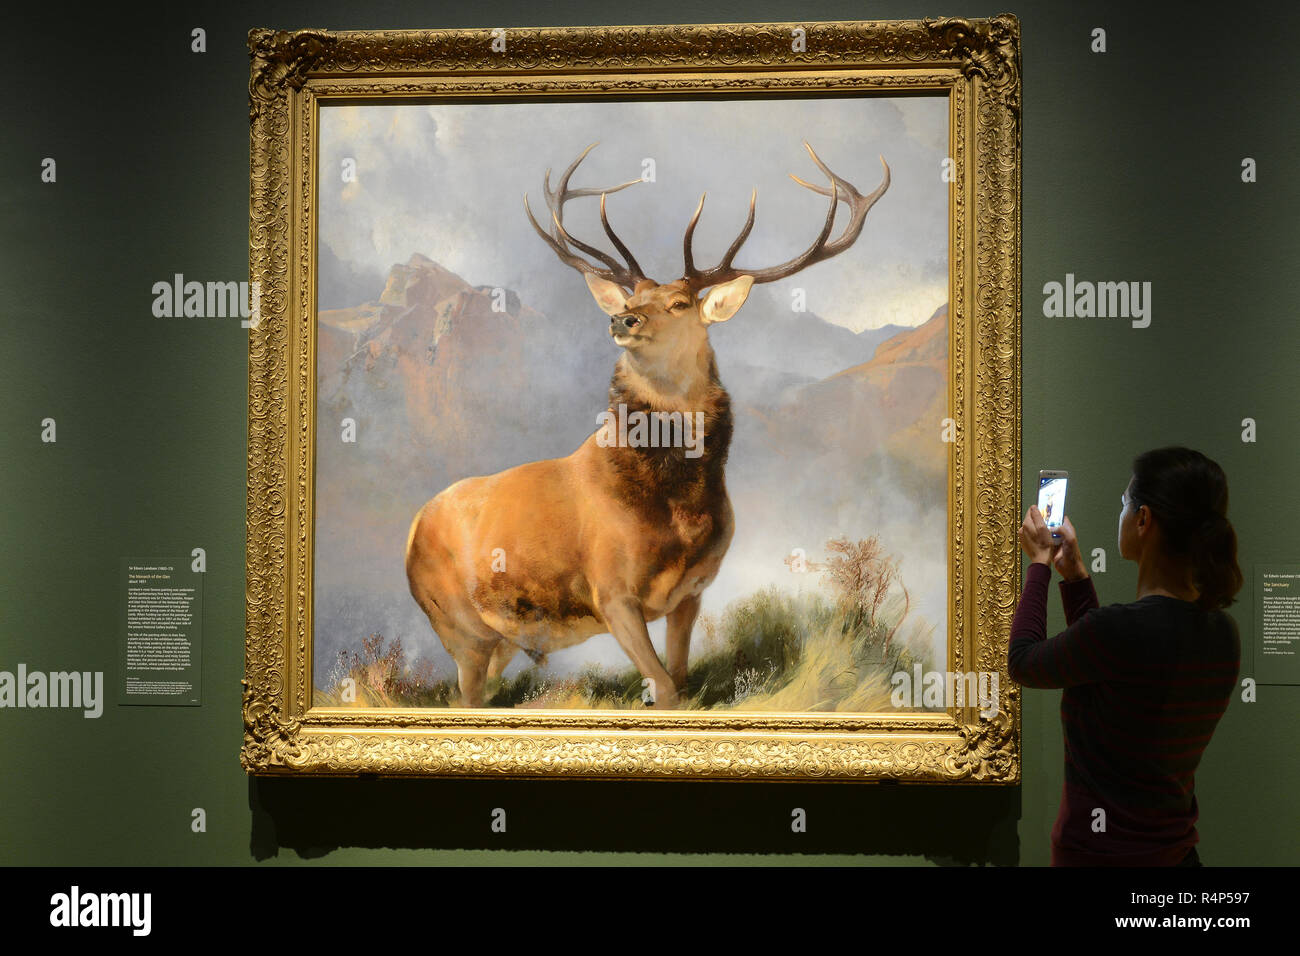 London, UK. 28th November, 2018. The Monarch of the Glen goes on display at The National Gallery. Painted around 1851 by English artist Sir Edwin Landseer, it depicts a royal stag and is arguably the world’s best known animal painting. Credit: Howard Jones/Alamy Live News Stock Photo